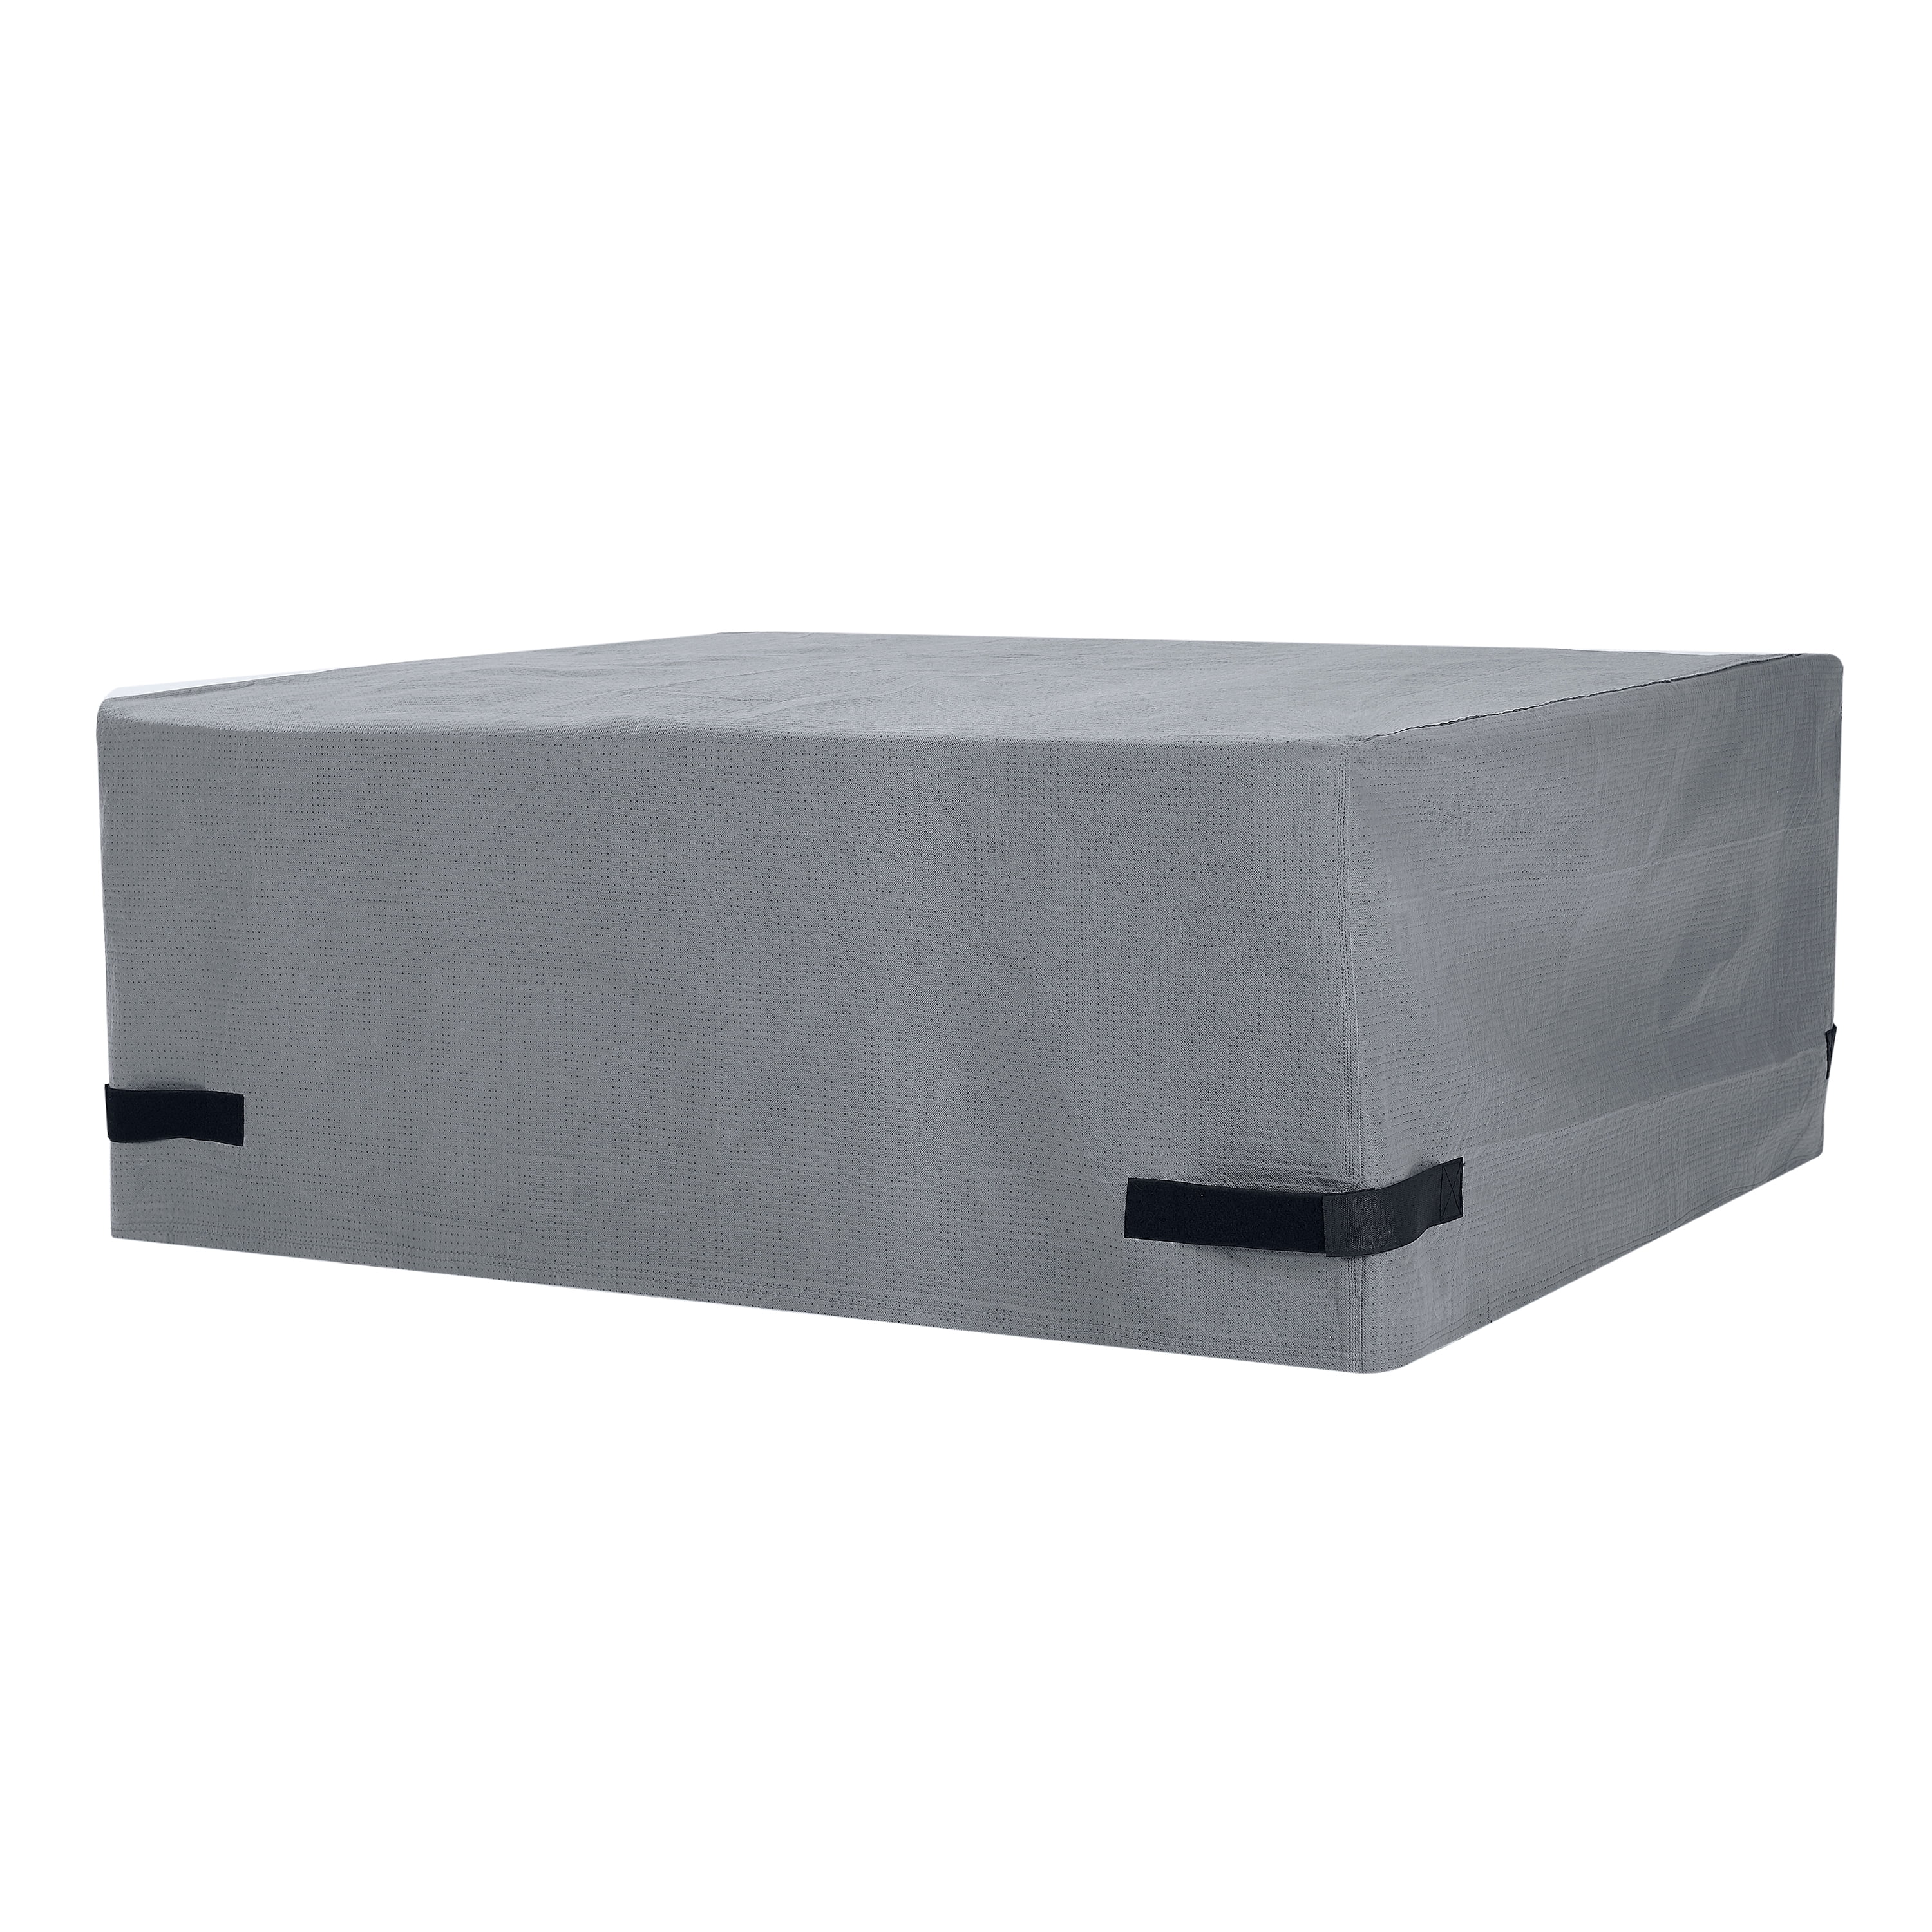 40 Inch Square Fire Pit Cover, Duck Fire Pit Covers